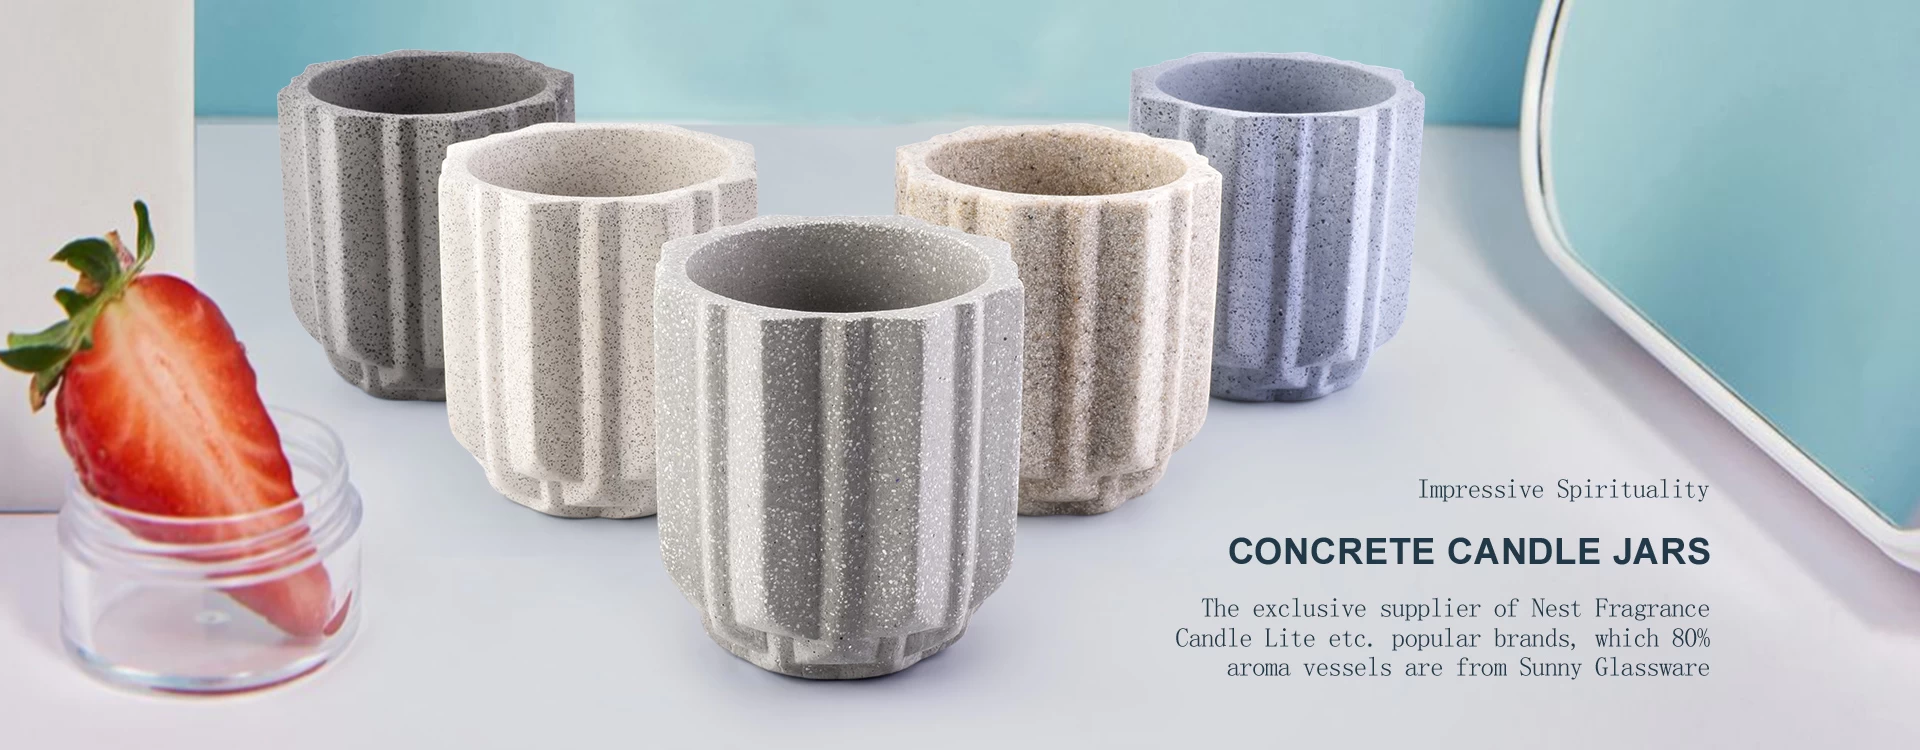 Wholesale Luxury Cement Candle Vessels Colorful Concrete Candle Jars with Lids